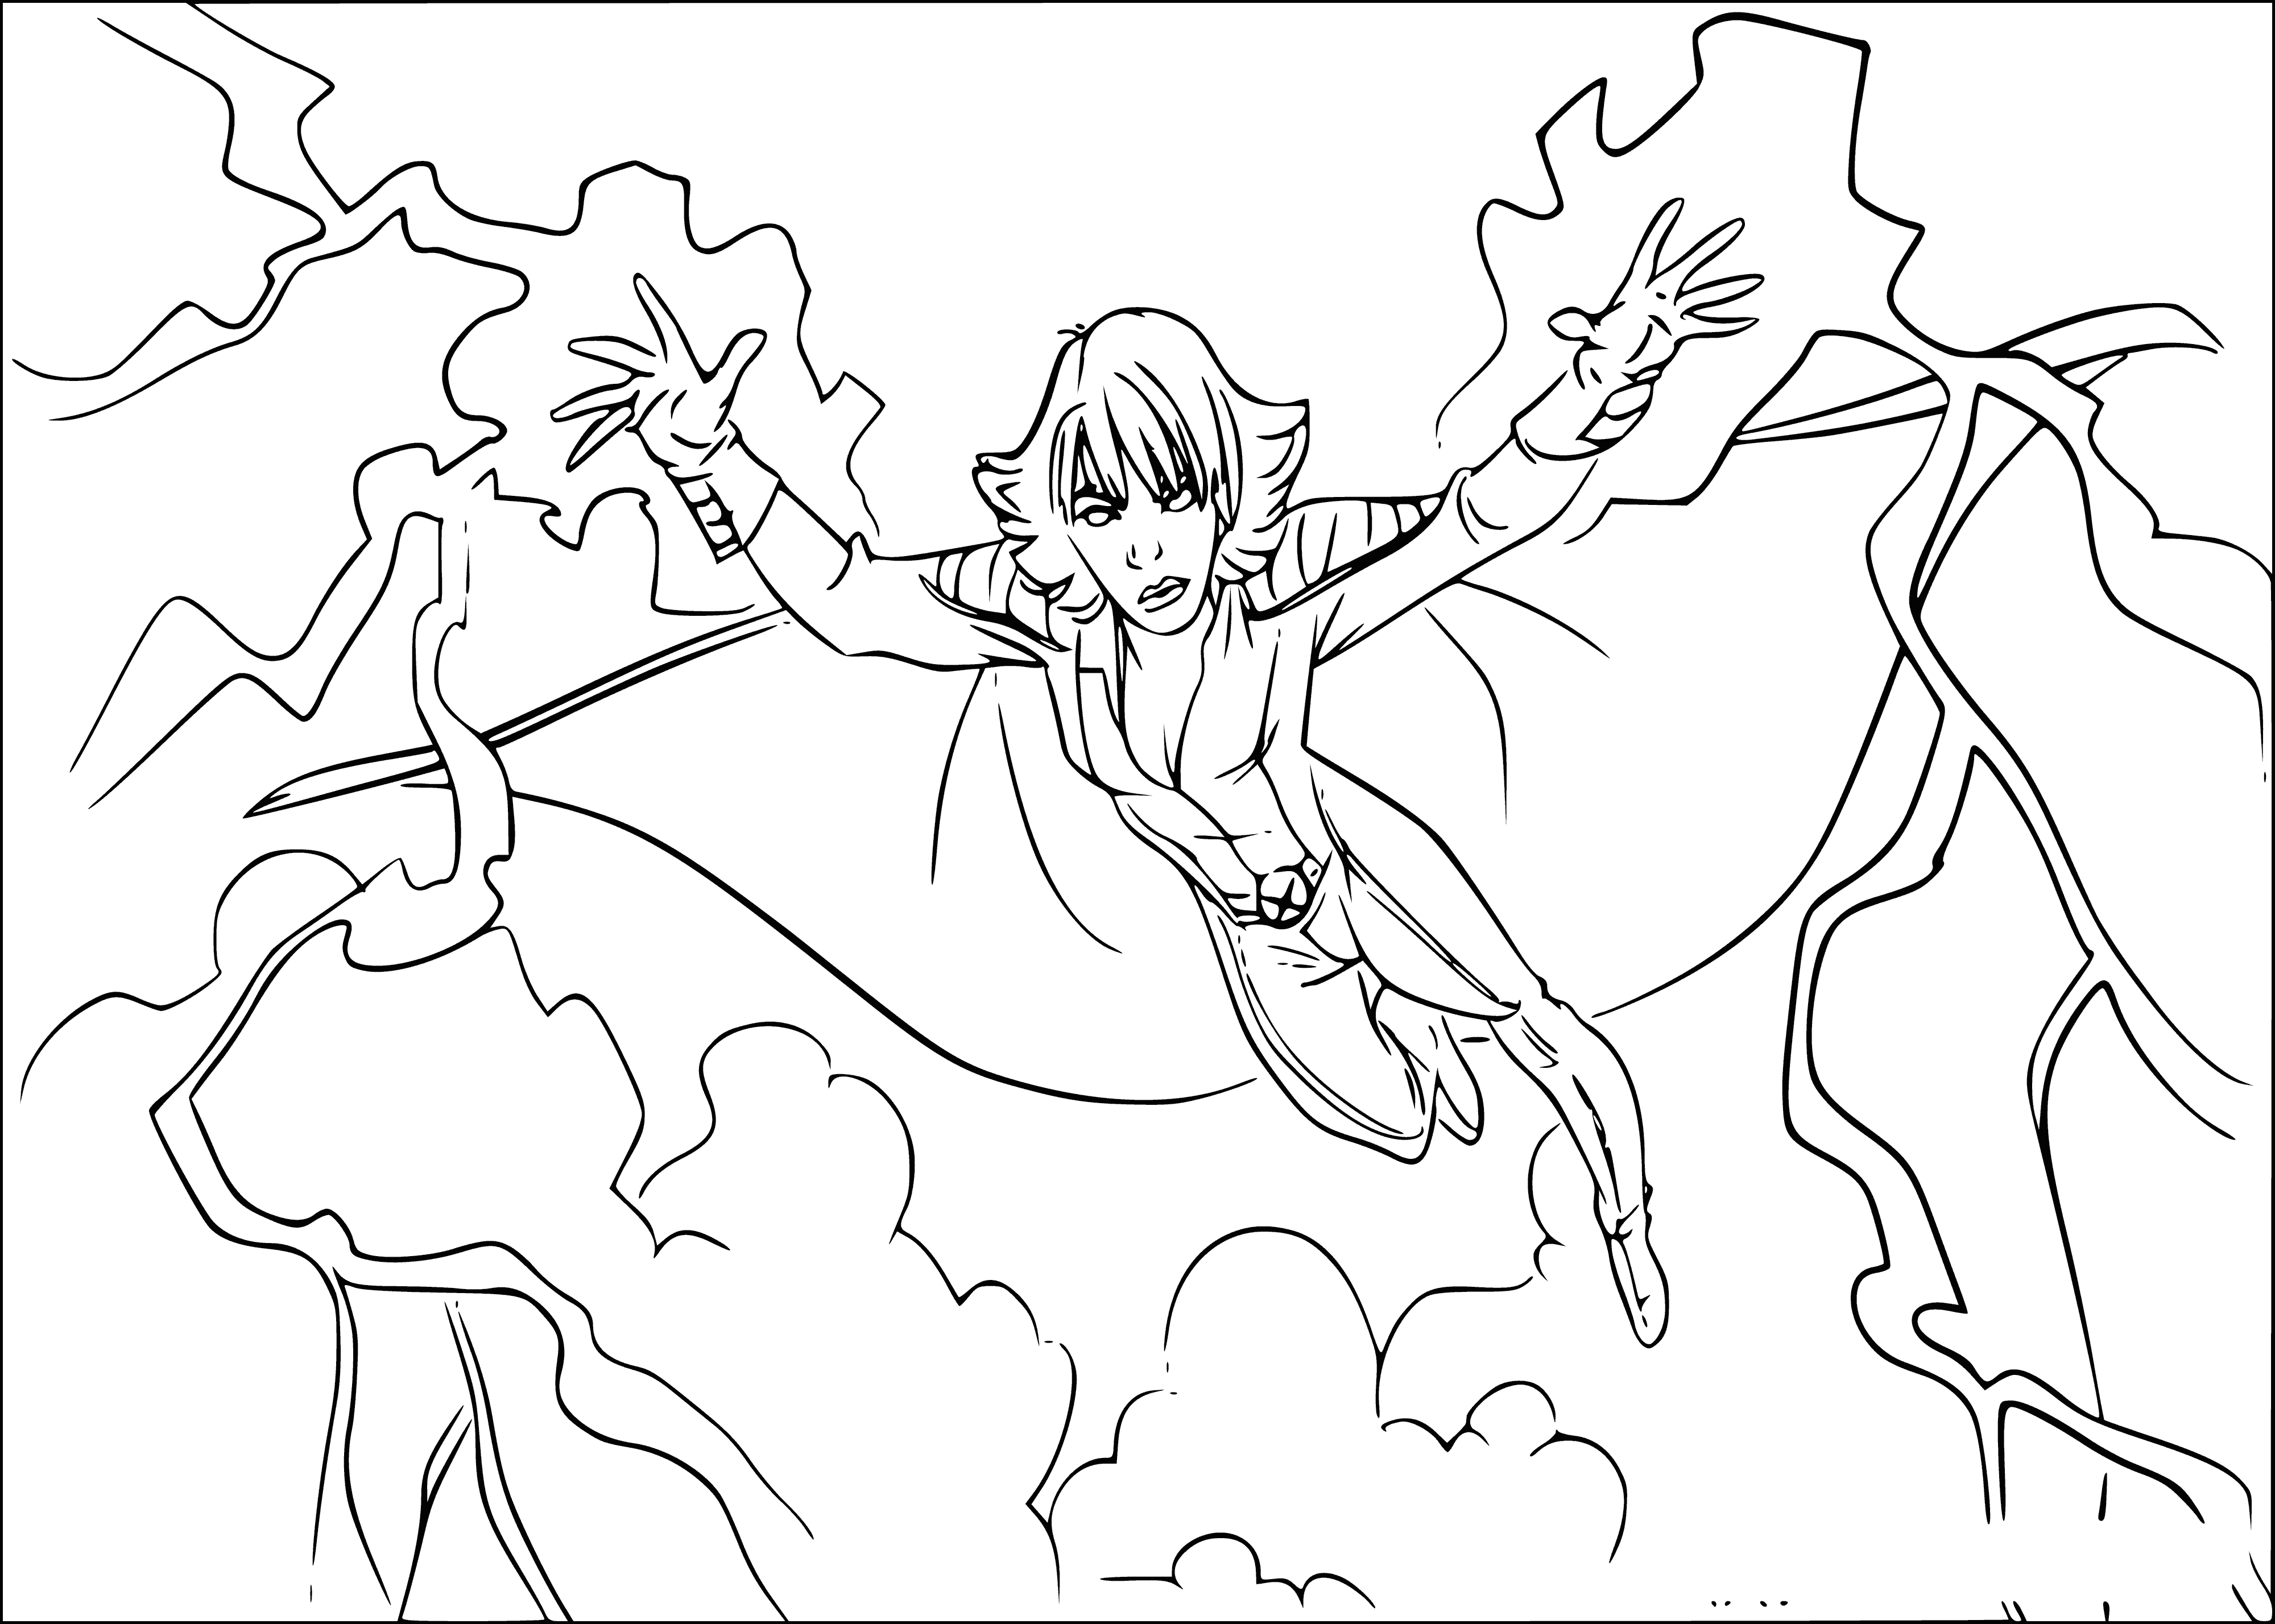 coloring page: Woman in blue and white suit with long cape has eyes closed, arms outstretched. Long white hair.